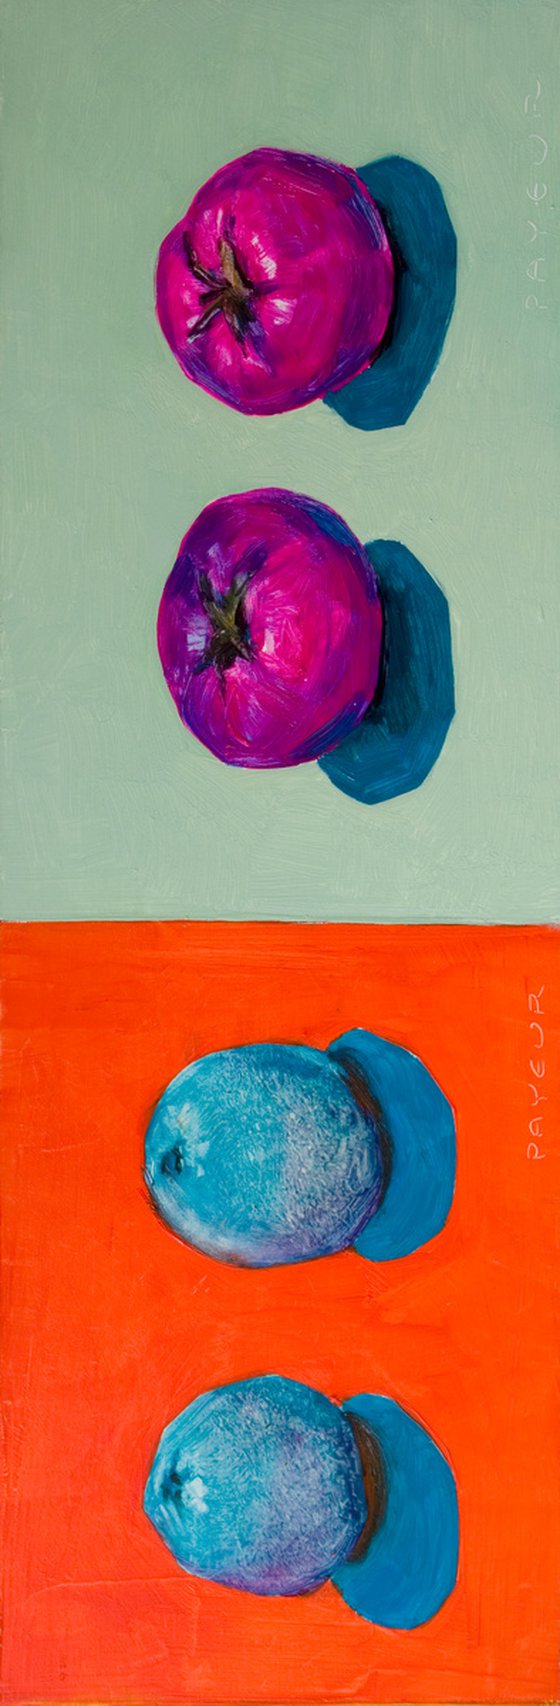 gift for food lovers: modern dyptic, still life of psychedelic tomatos and orange